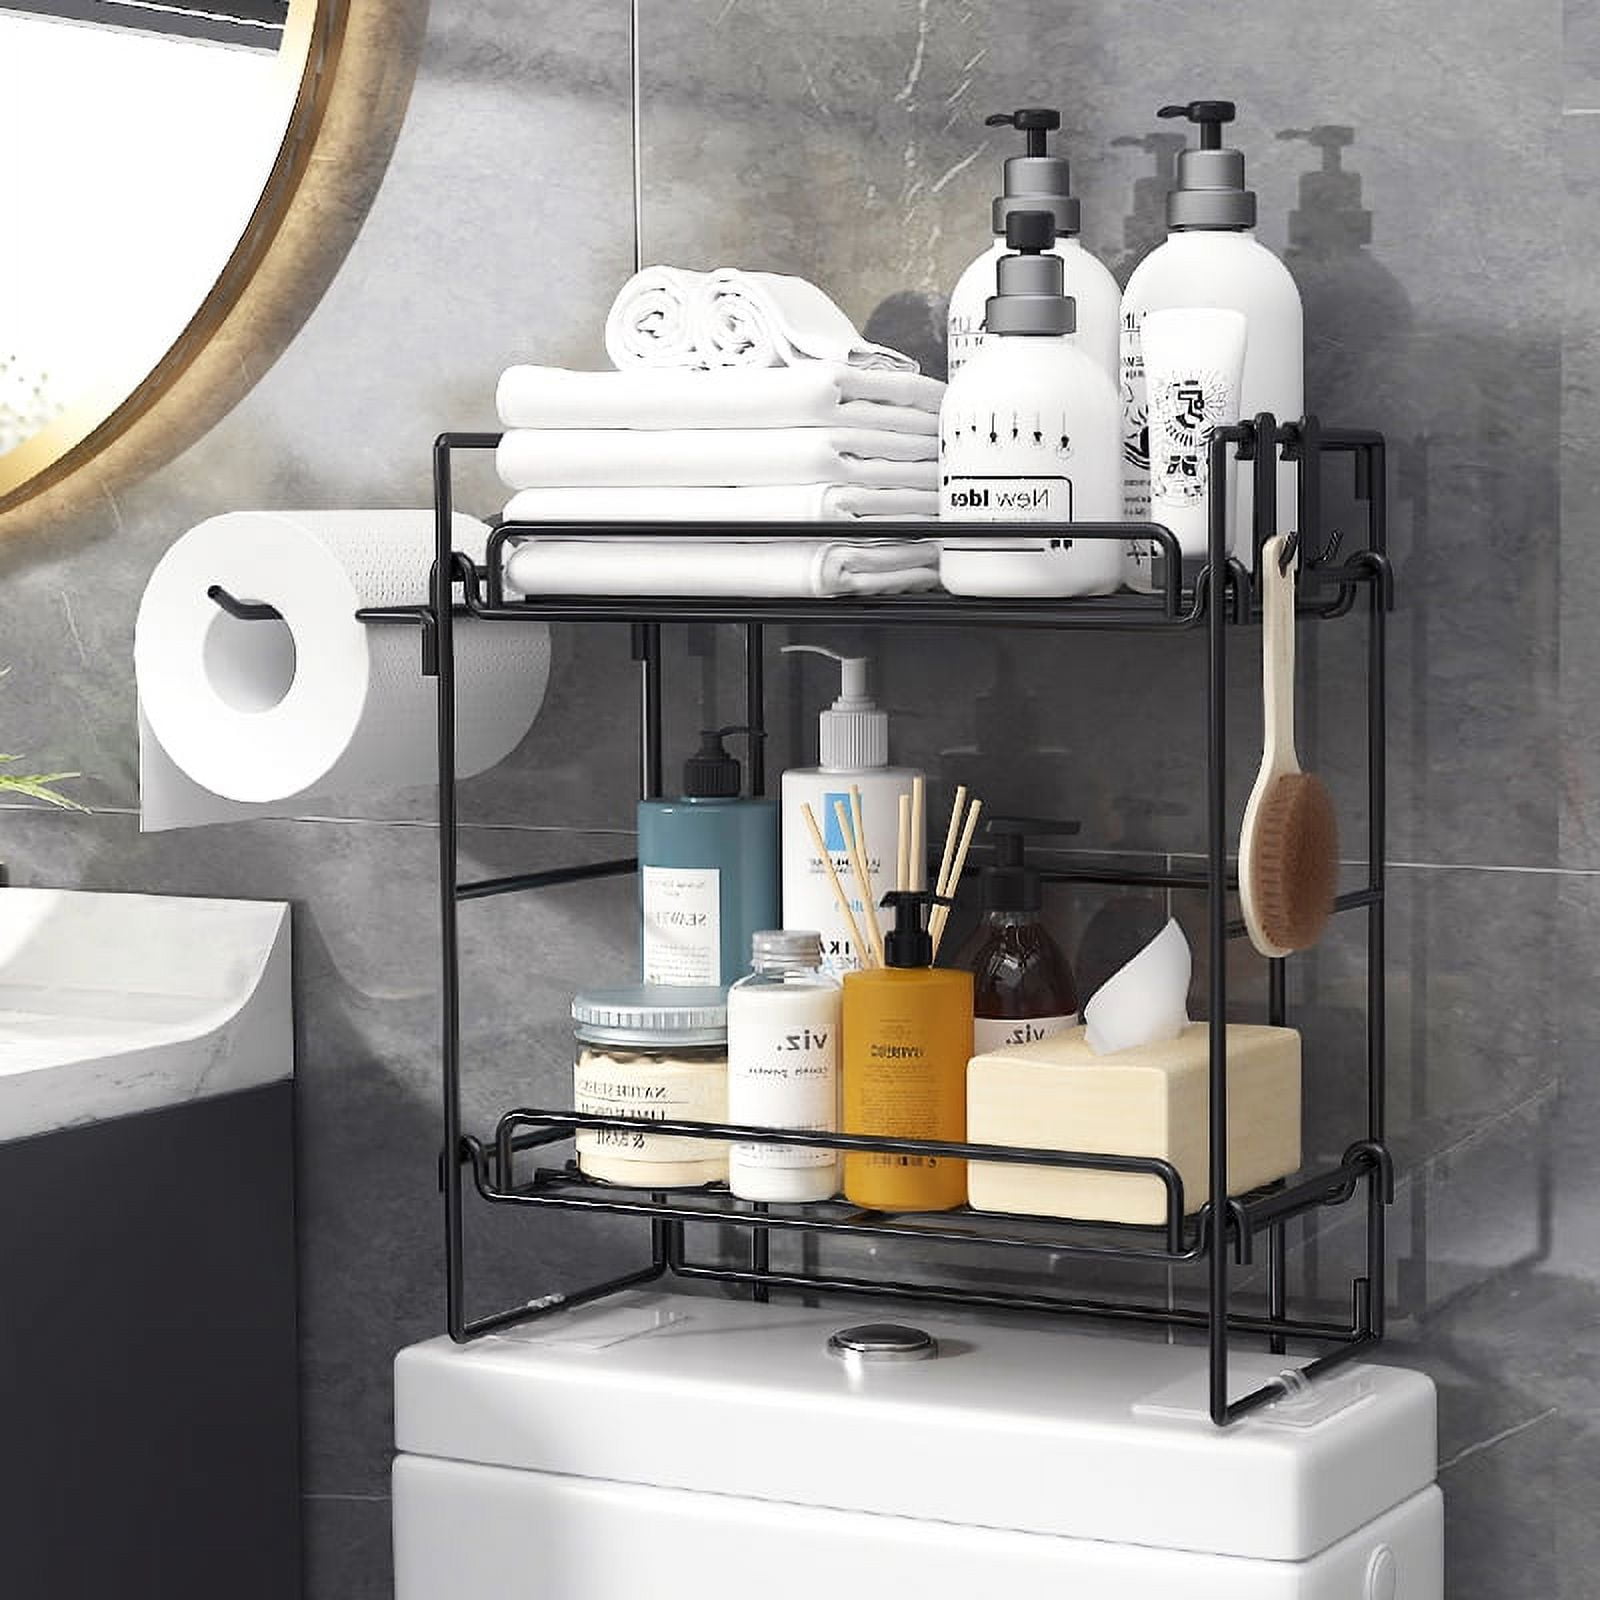 Godboat Bathroom Organizer, 2-Tier Over The Toilet Storage, Bathroom  Storage with 2 Hooks, Bathroom Accessories for Space Saver, No Drilling  Design